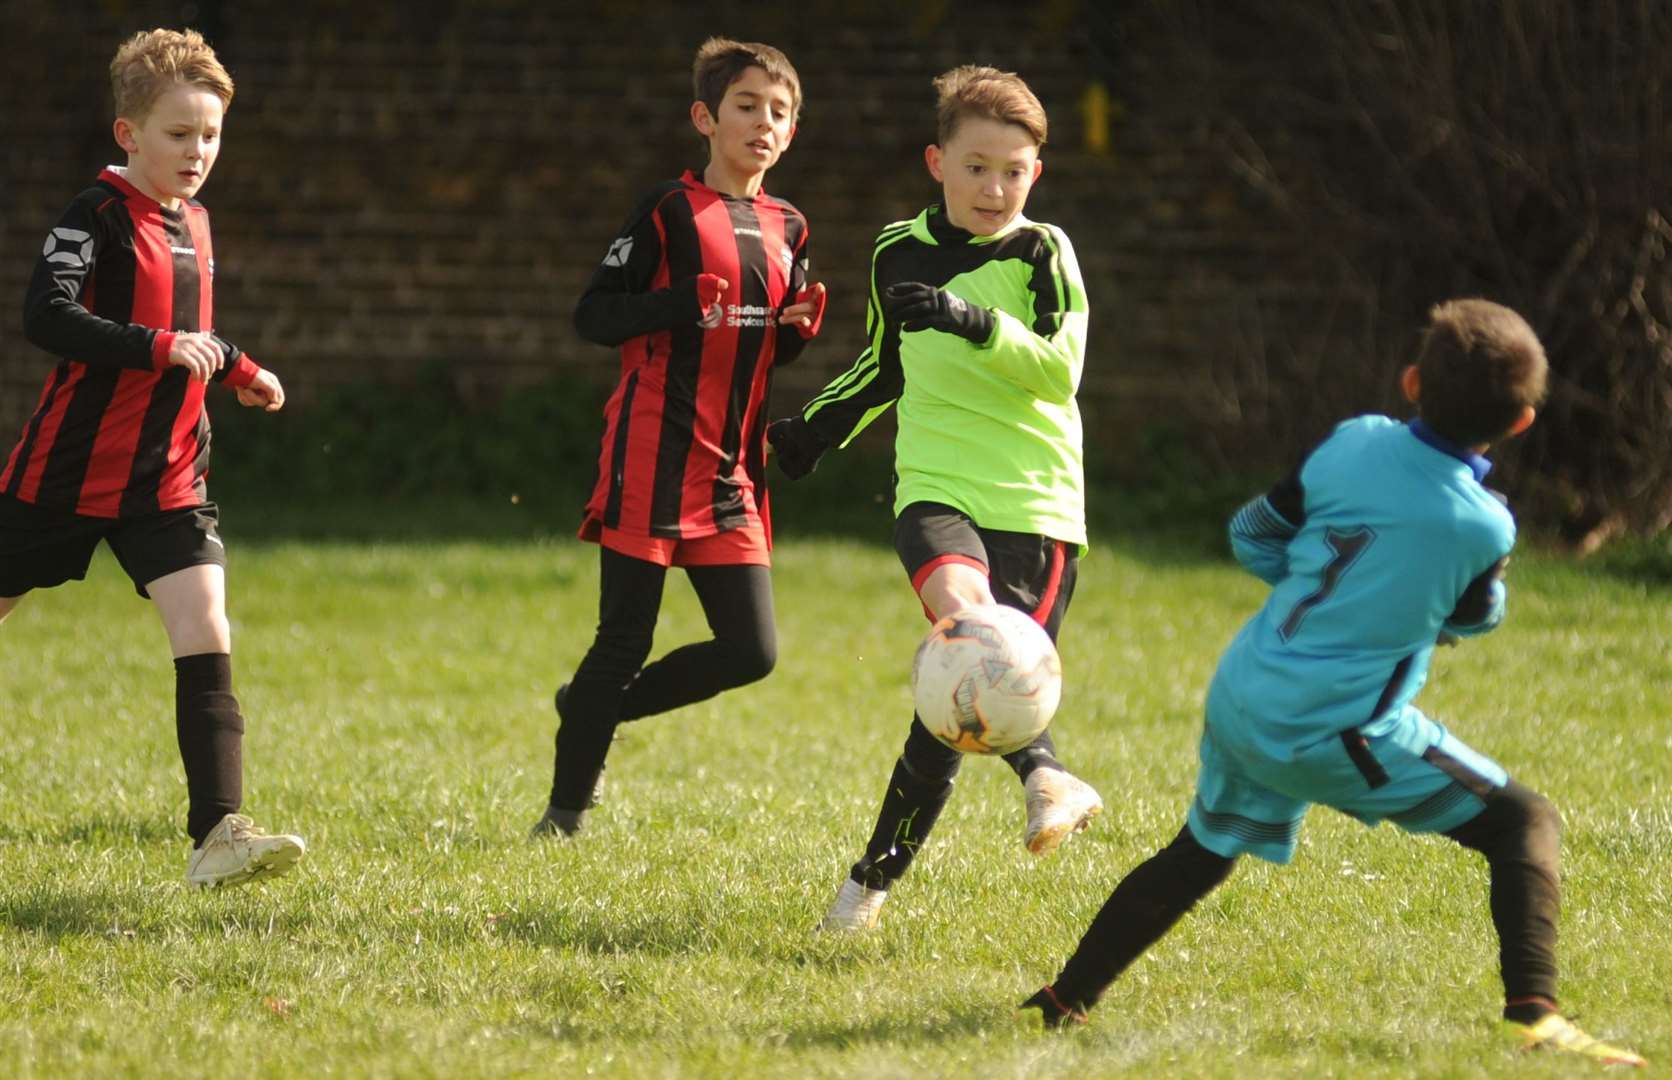 Strood United under-12s takes on Meopham Colts Yellow under-12s Picture: Steve Crispe FM7825597